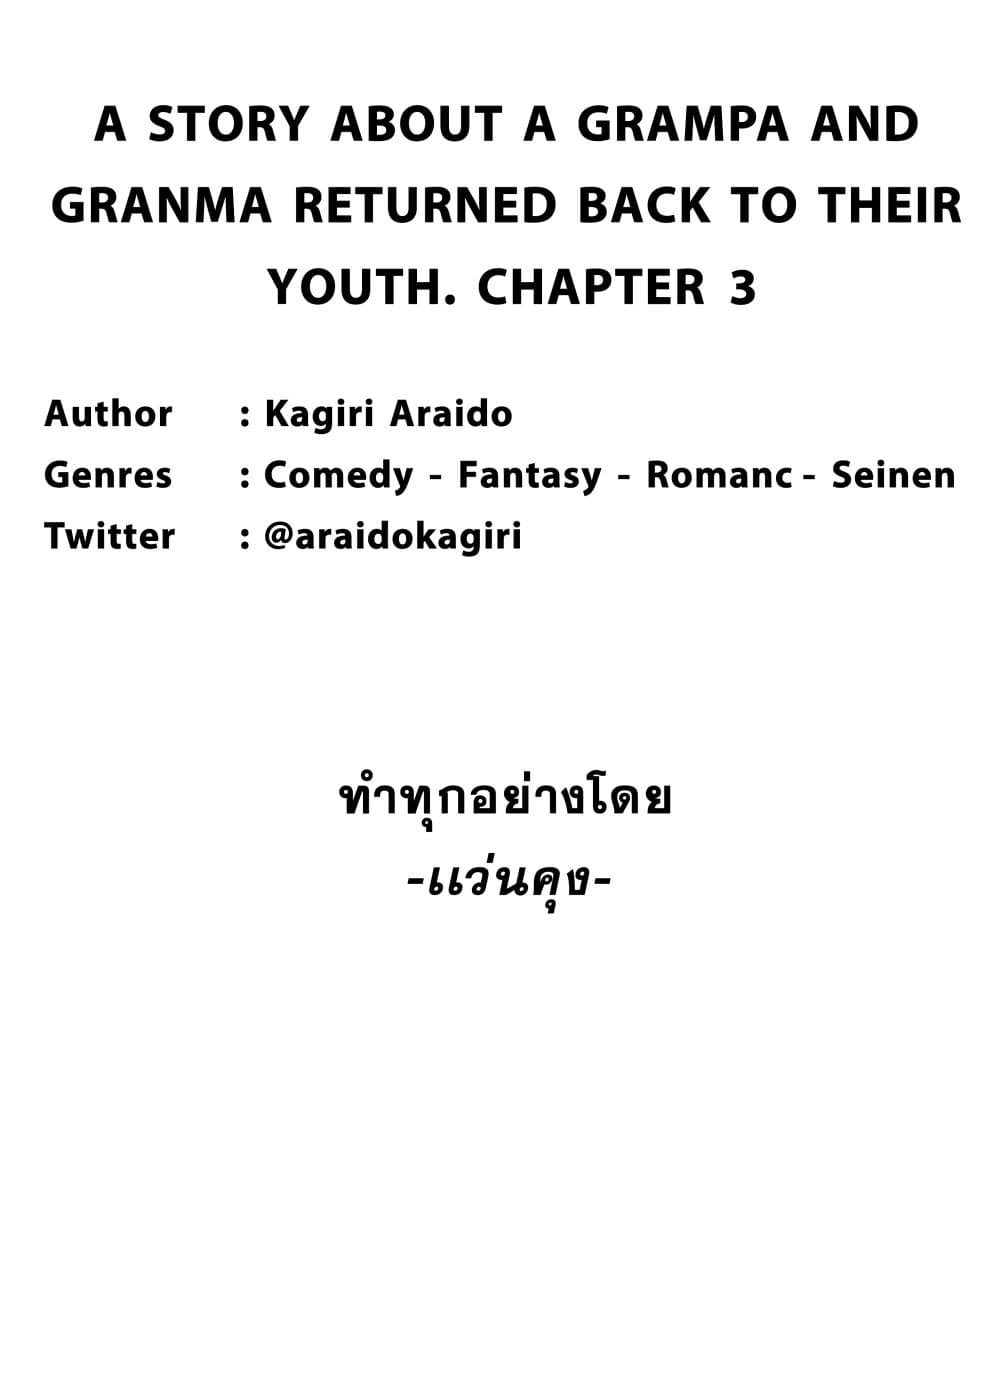 A Story About A Grampa and Granma Returned Back to their Youth คู่รักวัยดึกหวนคืนวัยหวาน 3-3